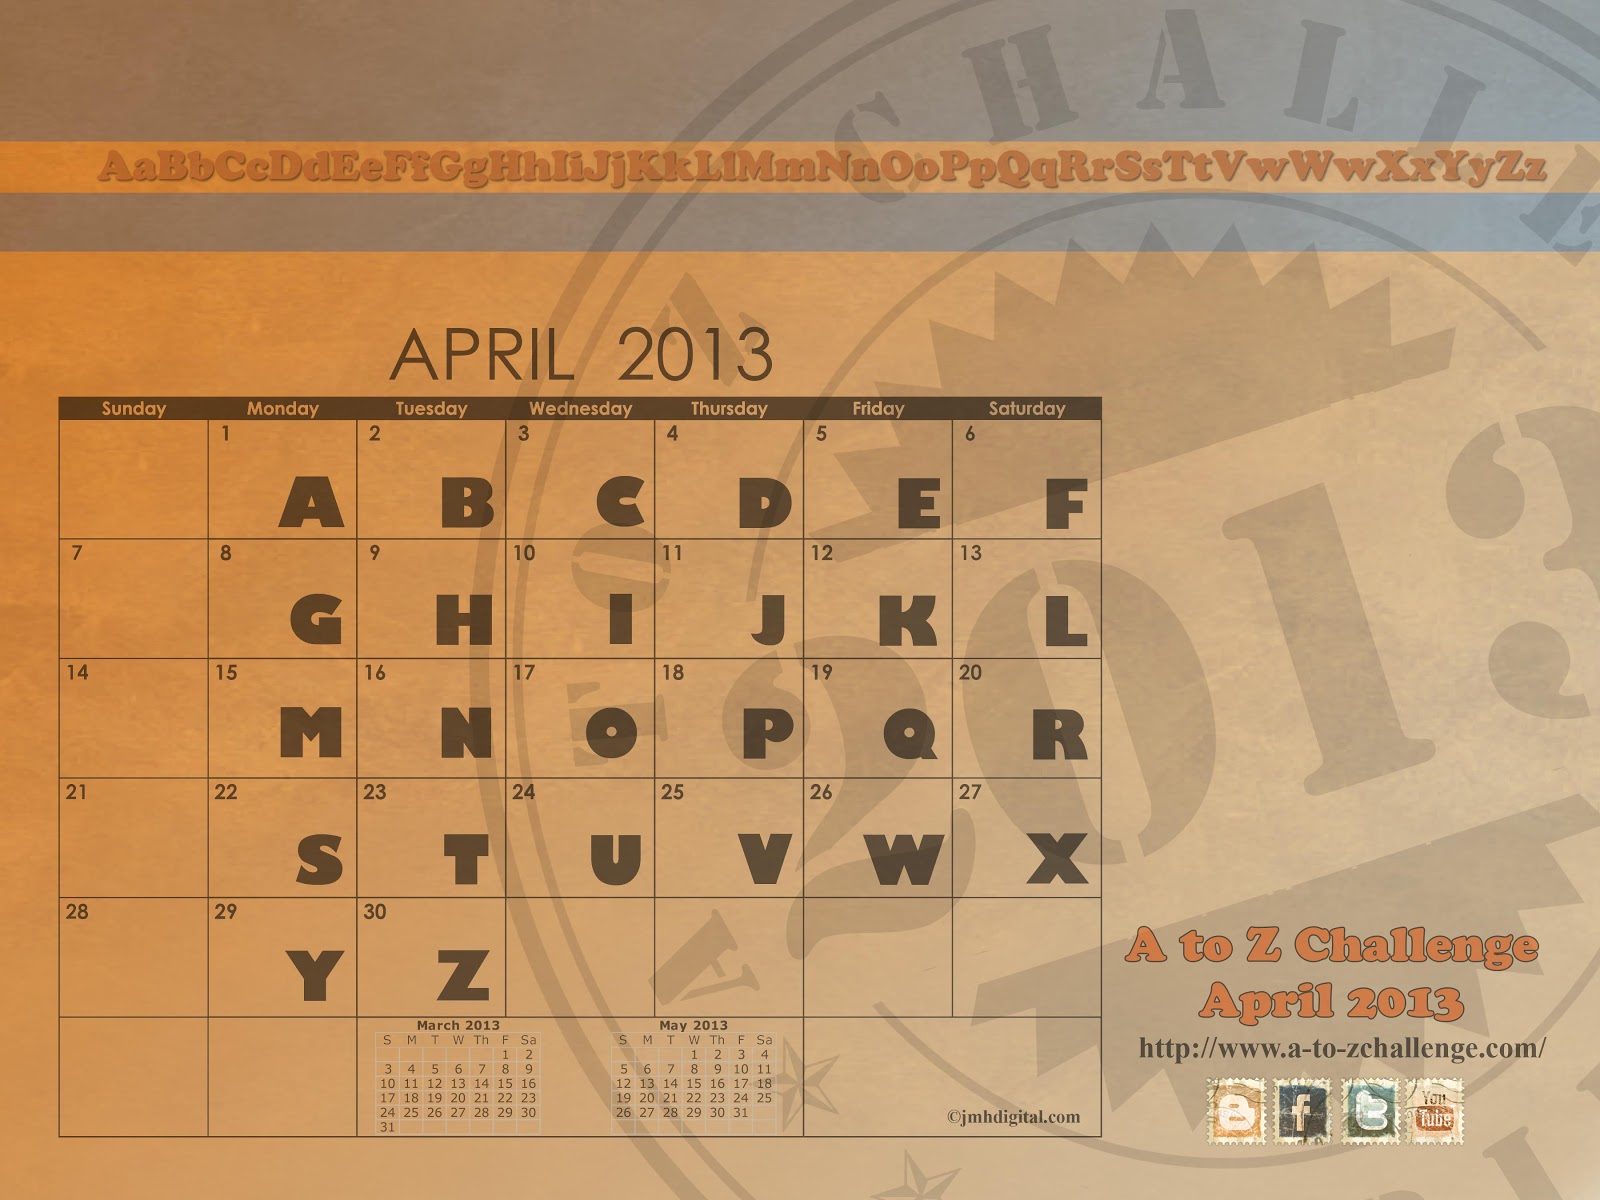 I’m Doing the April 2013 A to Z Challenge!